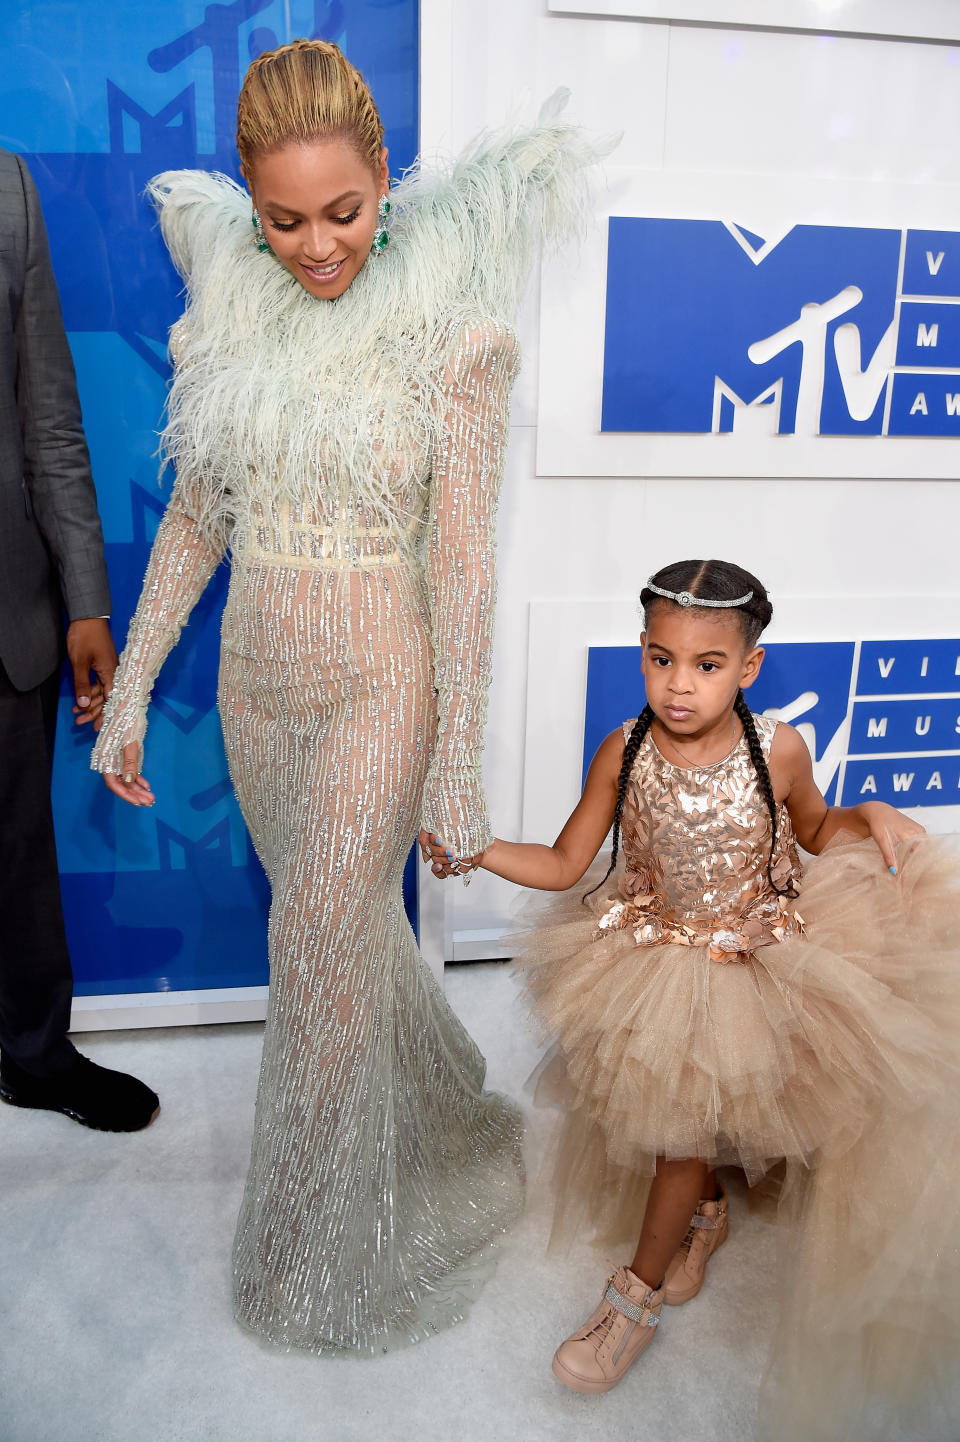 Beyoncé and Blue Ivy at the Video Music Awards in 2016